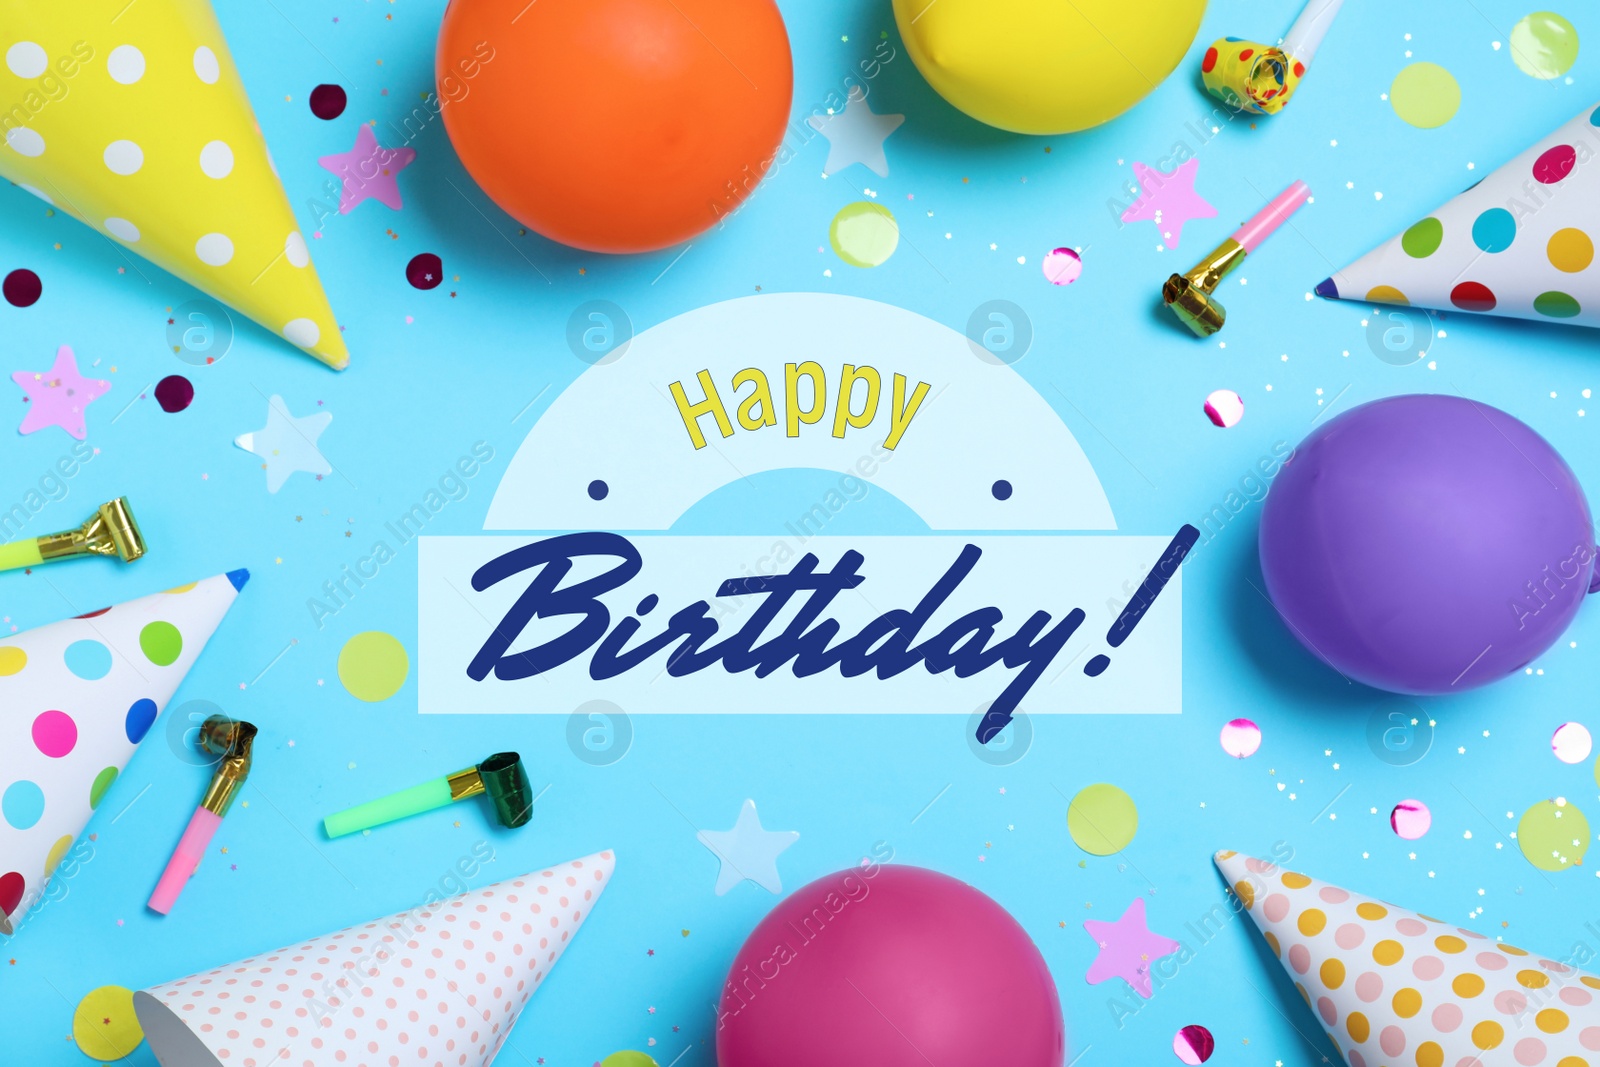 Image of Happy Birthday! Frame made of party hats and decor on light blue background, flat lay